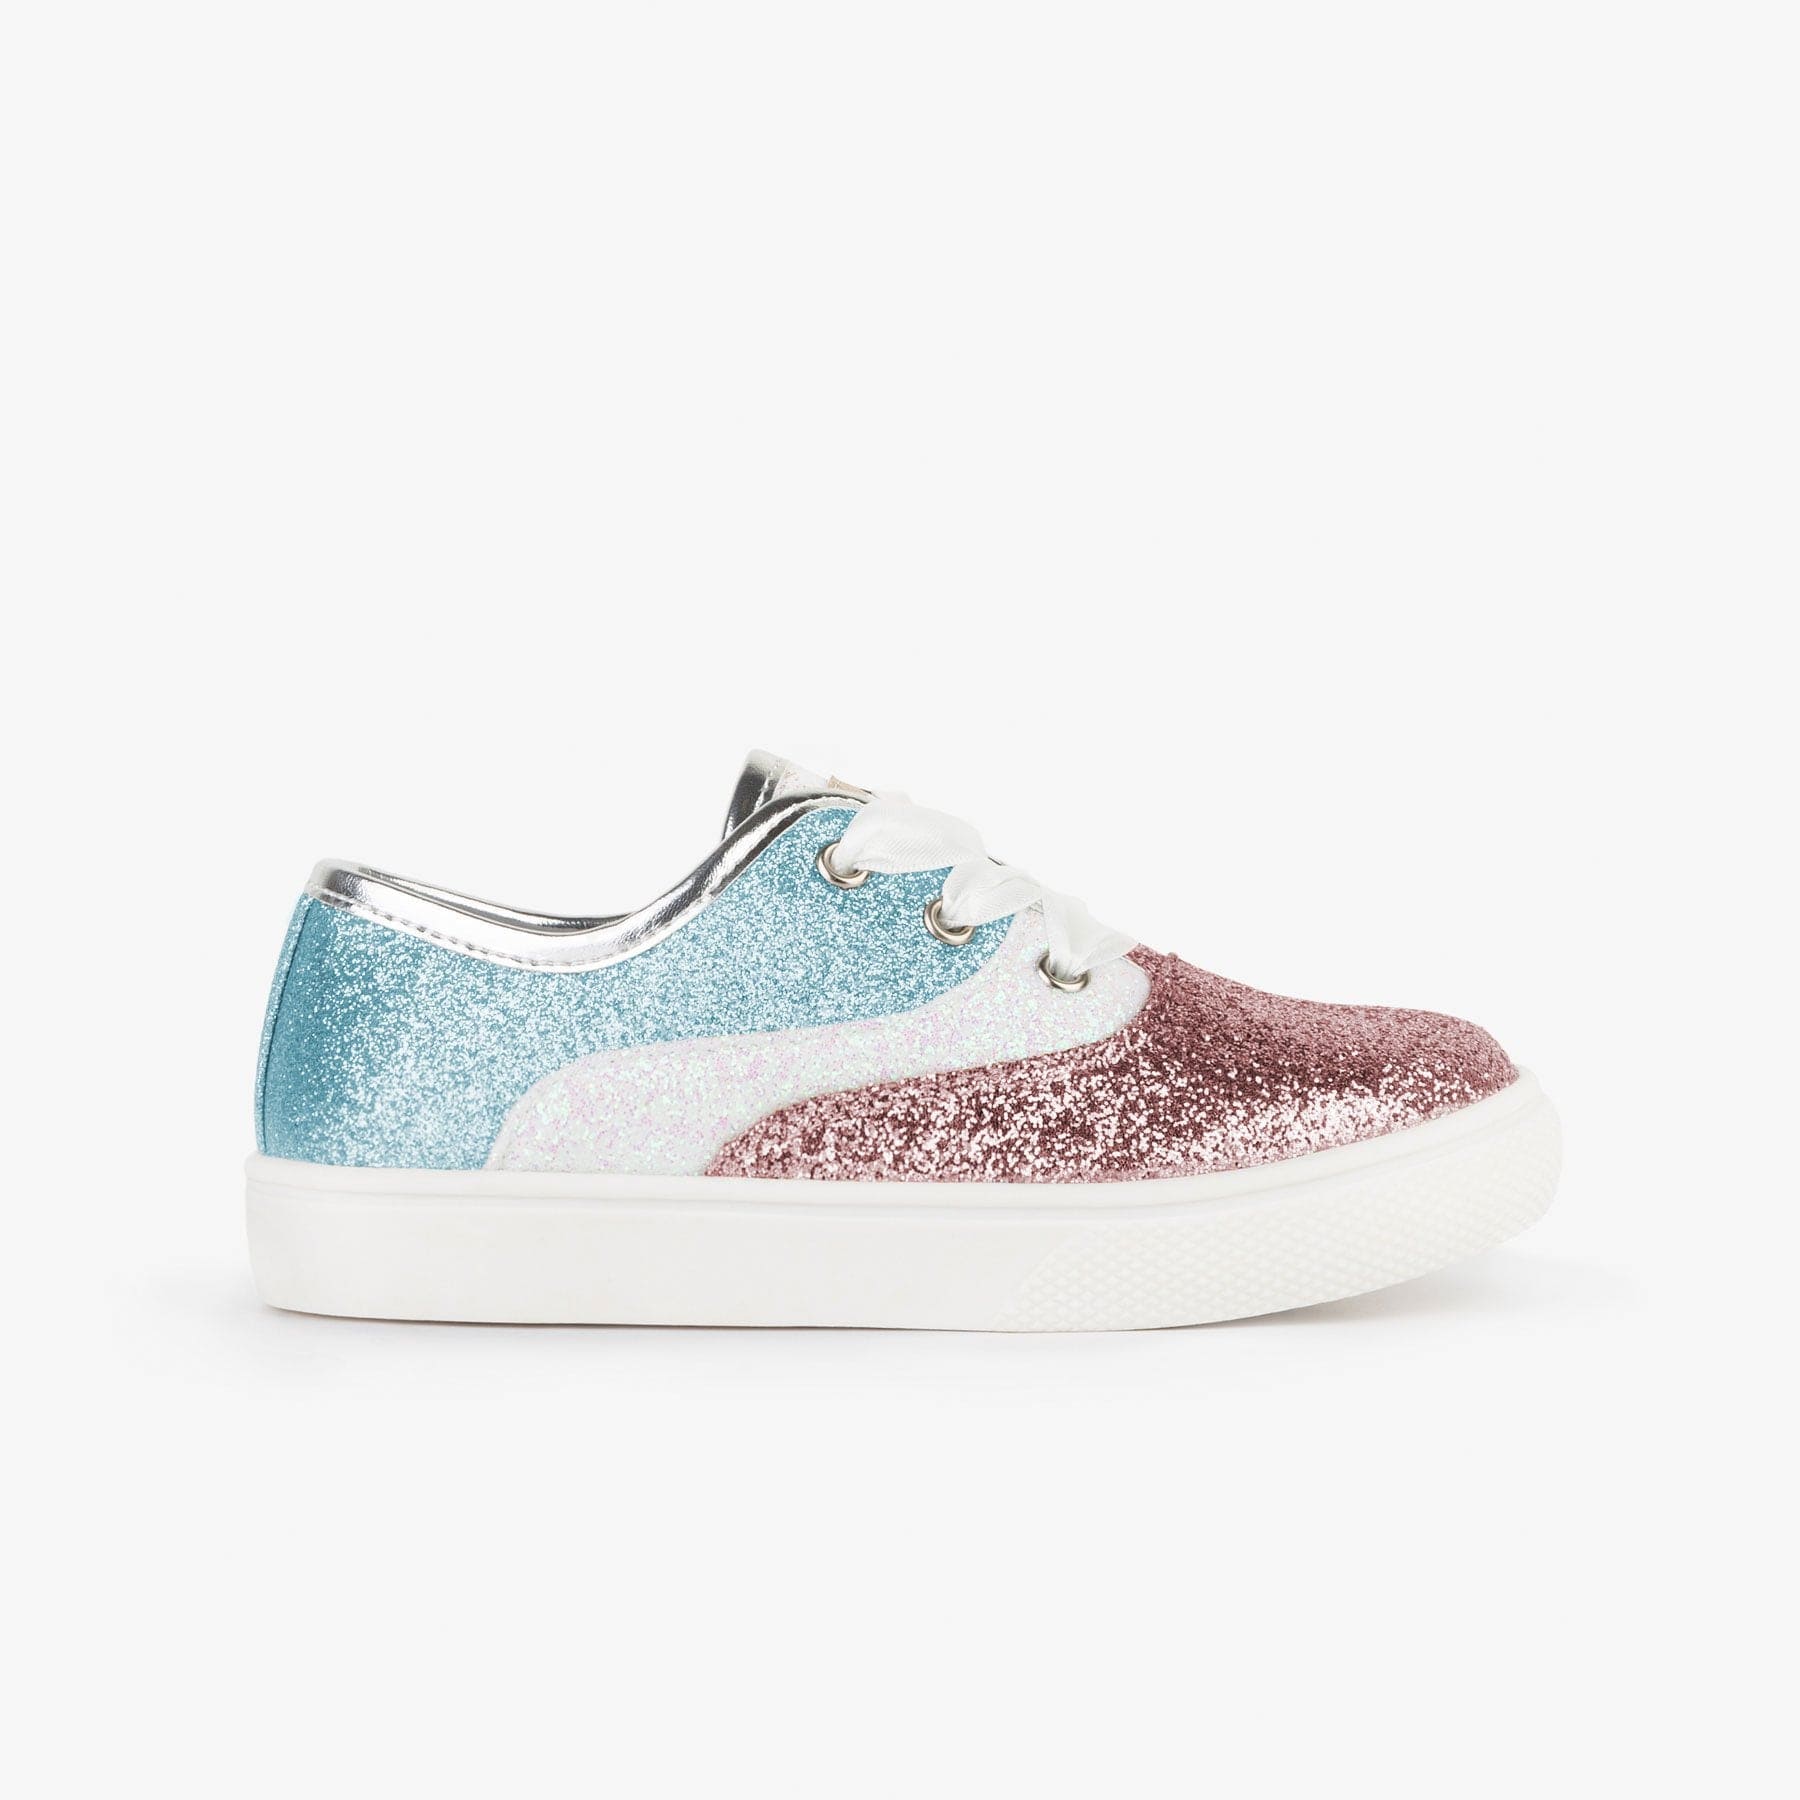 CONGUITOS Shoes Girl's Pink Blue Glitter Sneakers